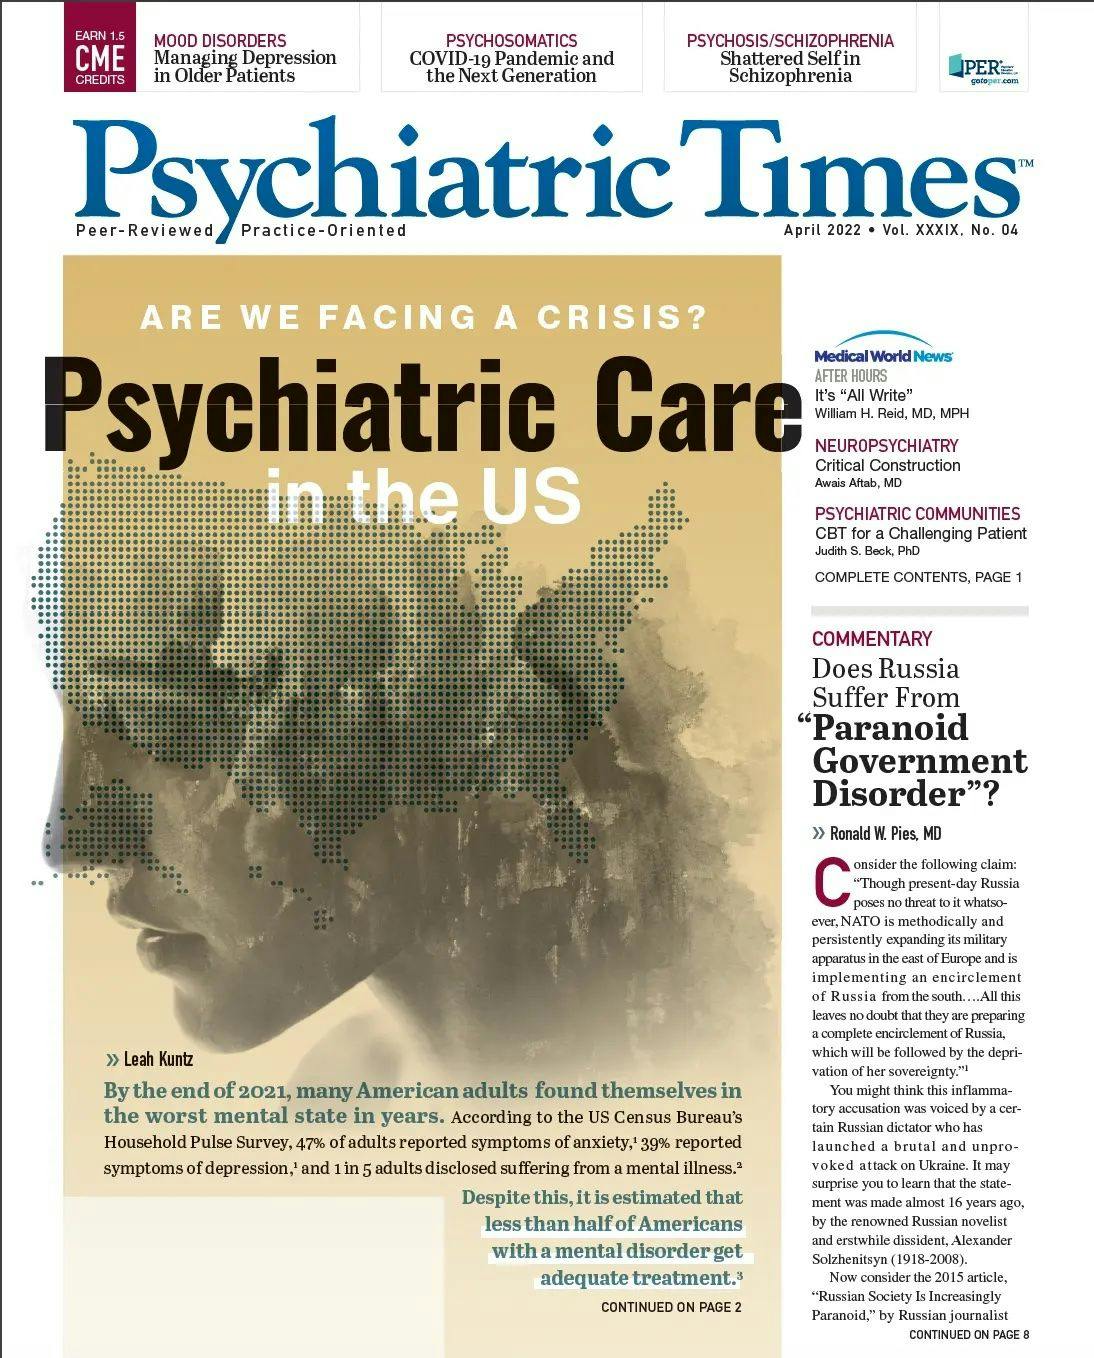 The experts weighed in on a wide variety of psychiatric issues for the April 2022 issue of Psychiatric Times.